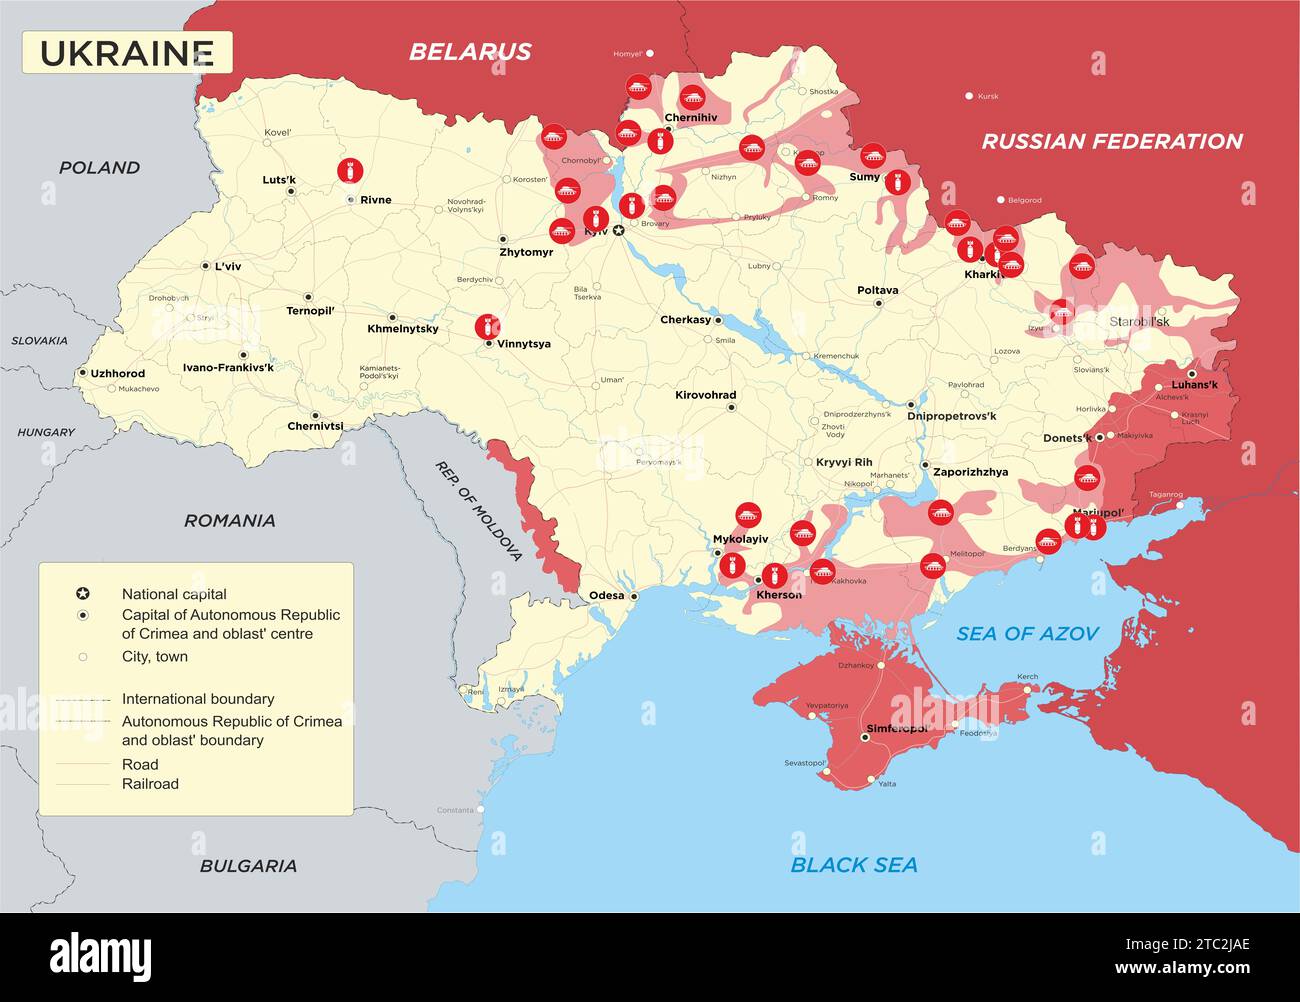 Ukraine war map. Russia in Ukraine and the Middle East. Russian military conflict with Ukraine. Russian Agression. Geopolitical concept illustration. Stock Photo